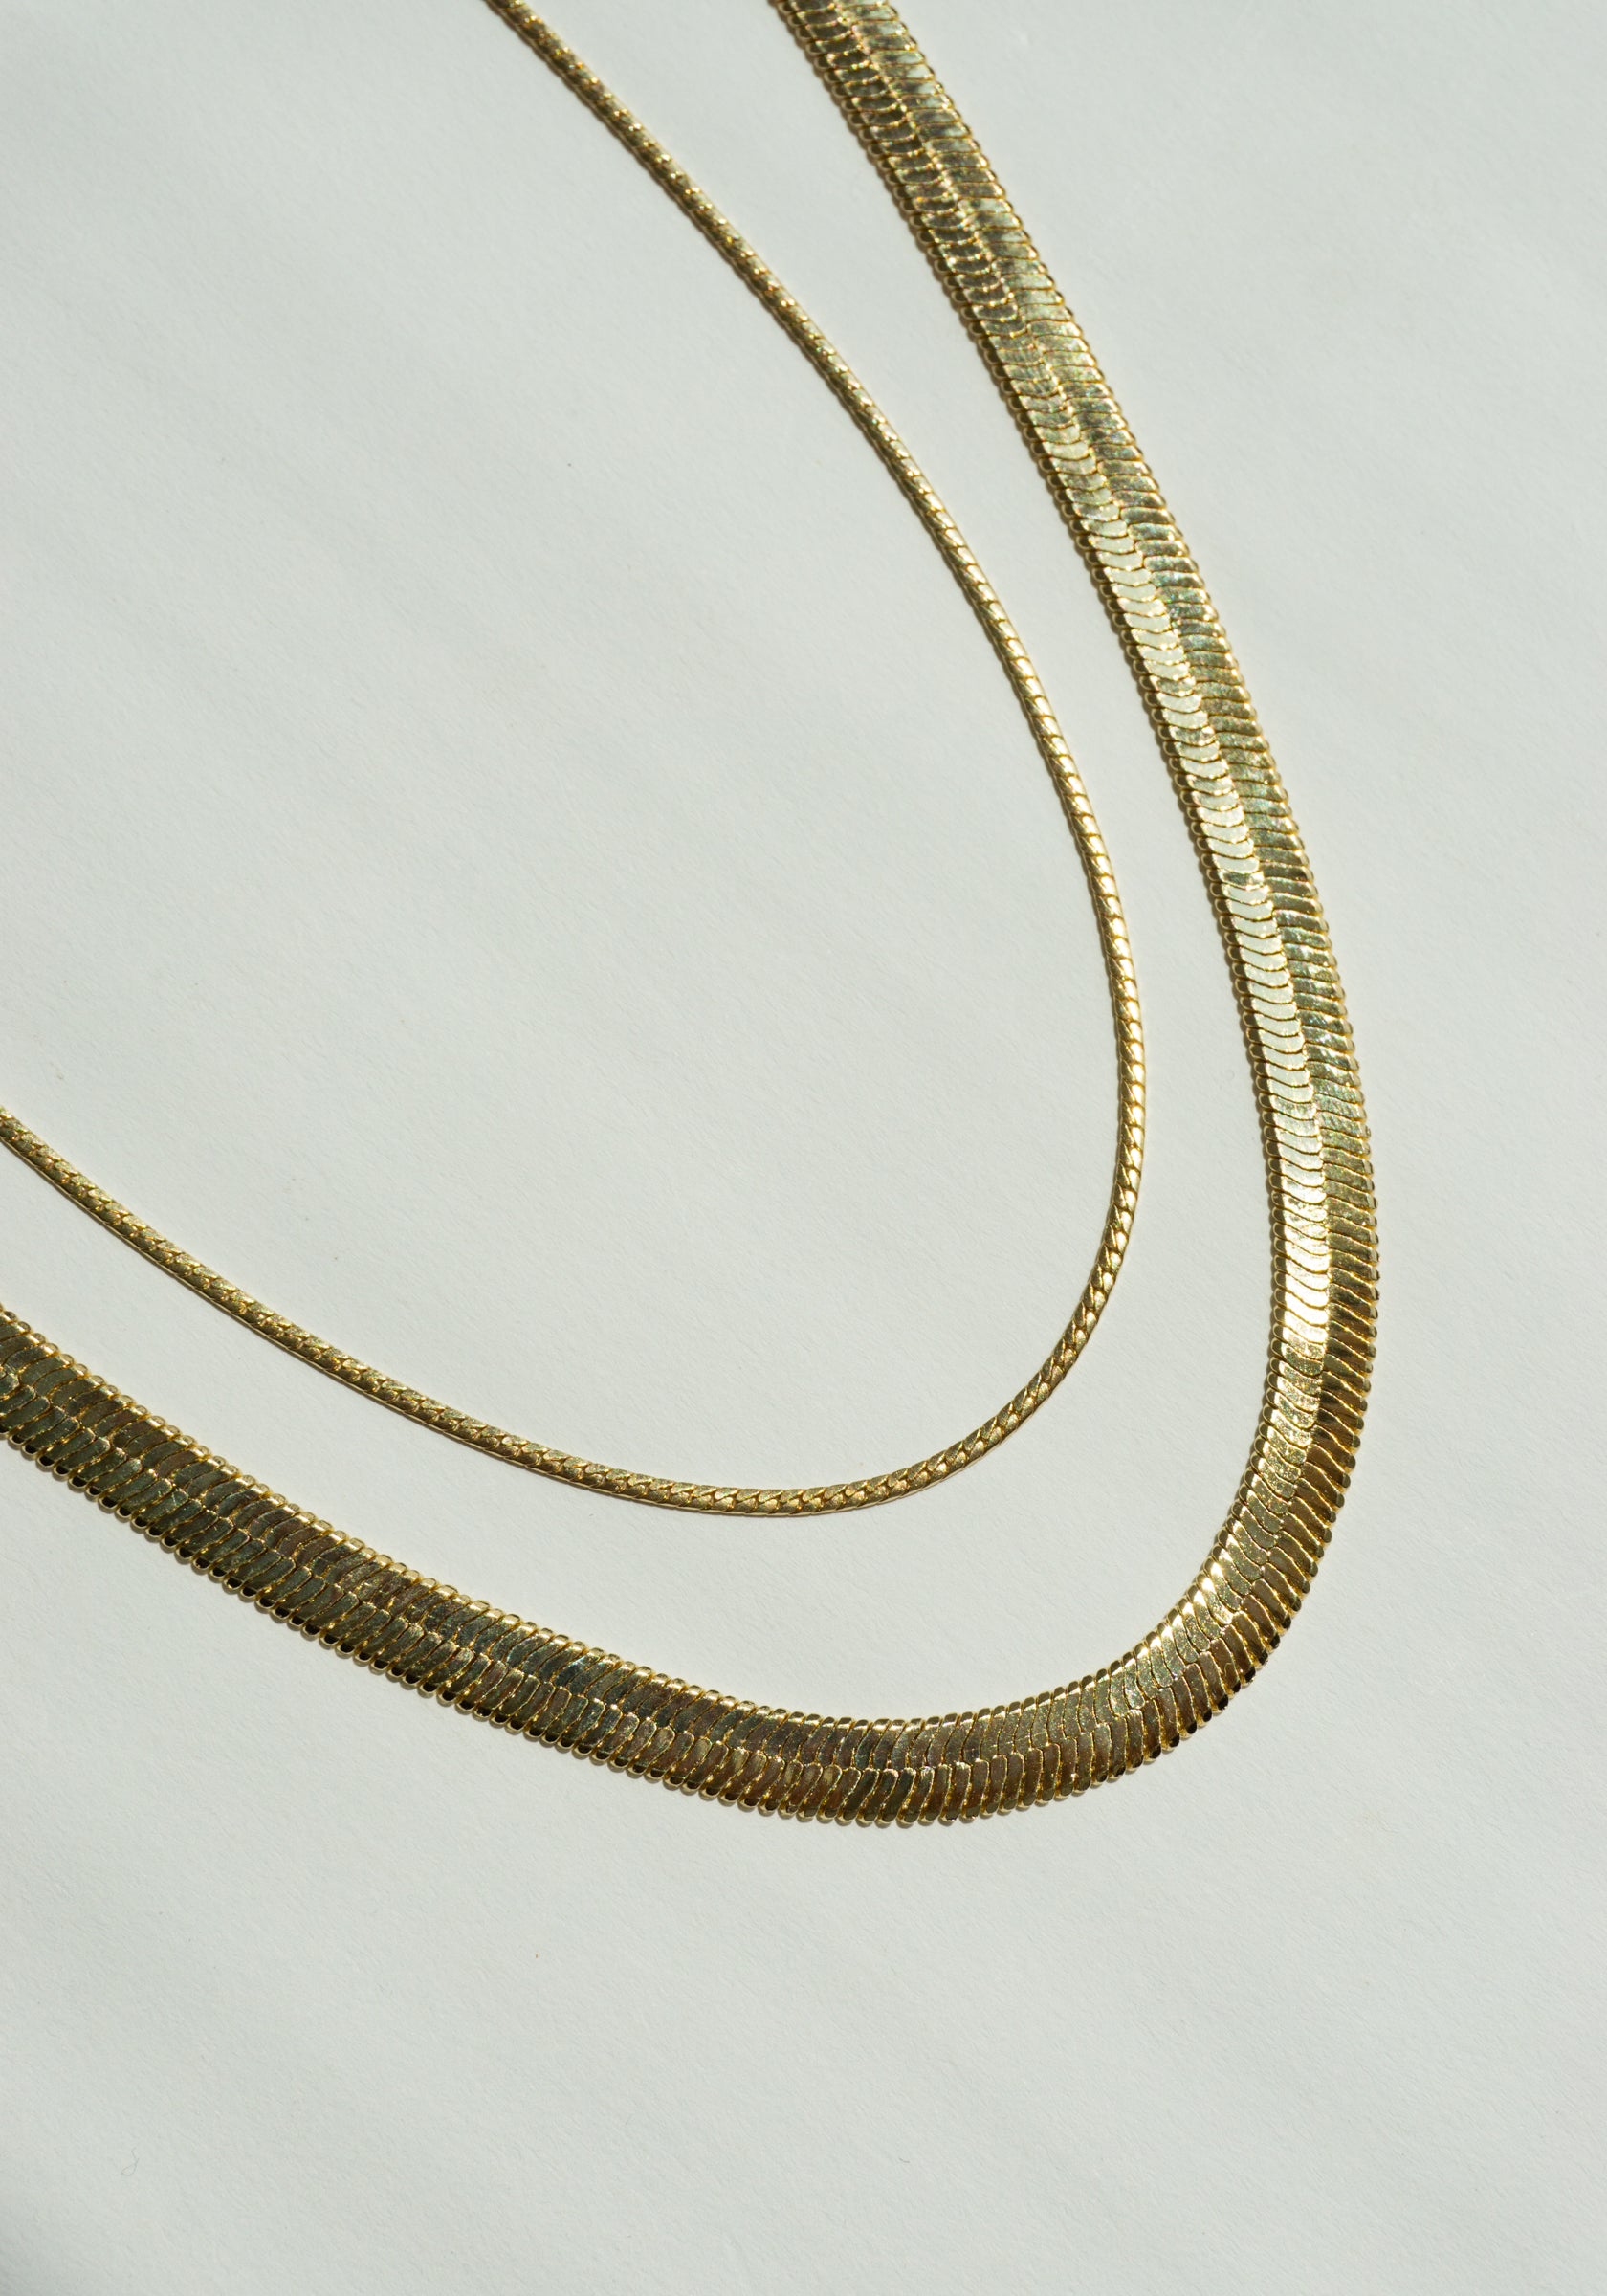 LAURA LOMBARDI Isa 14K Gold Plated Chain Necklace | Holt Renfrew